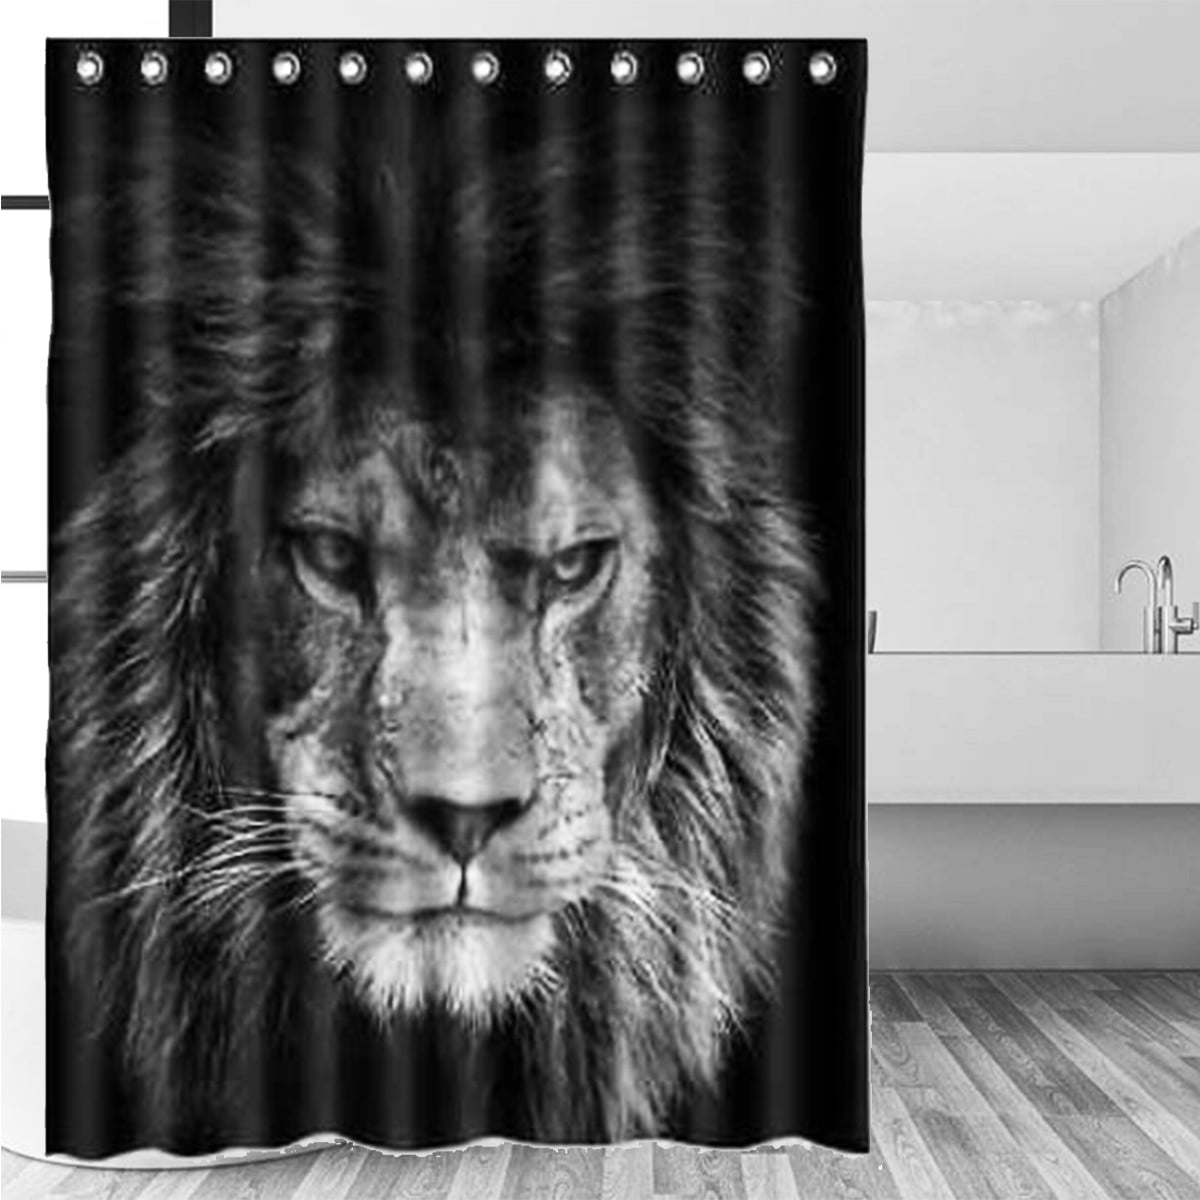 Details about  / Bikini Lady 180cm Extra Long Art Shower Curtain Waterproof Polyester Fabric